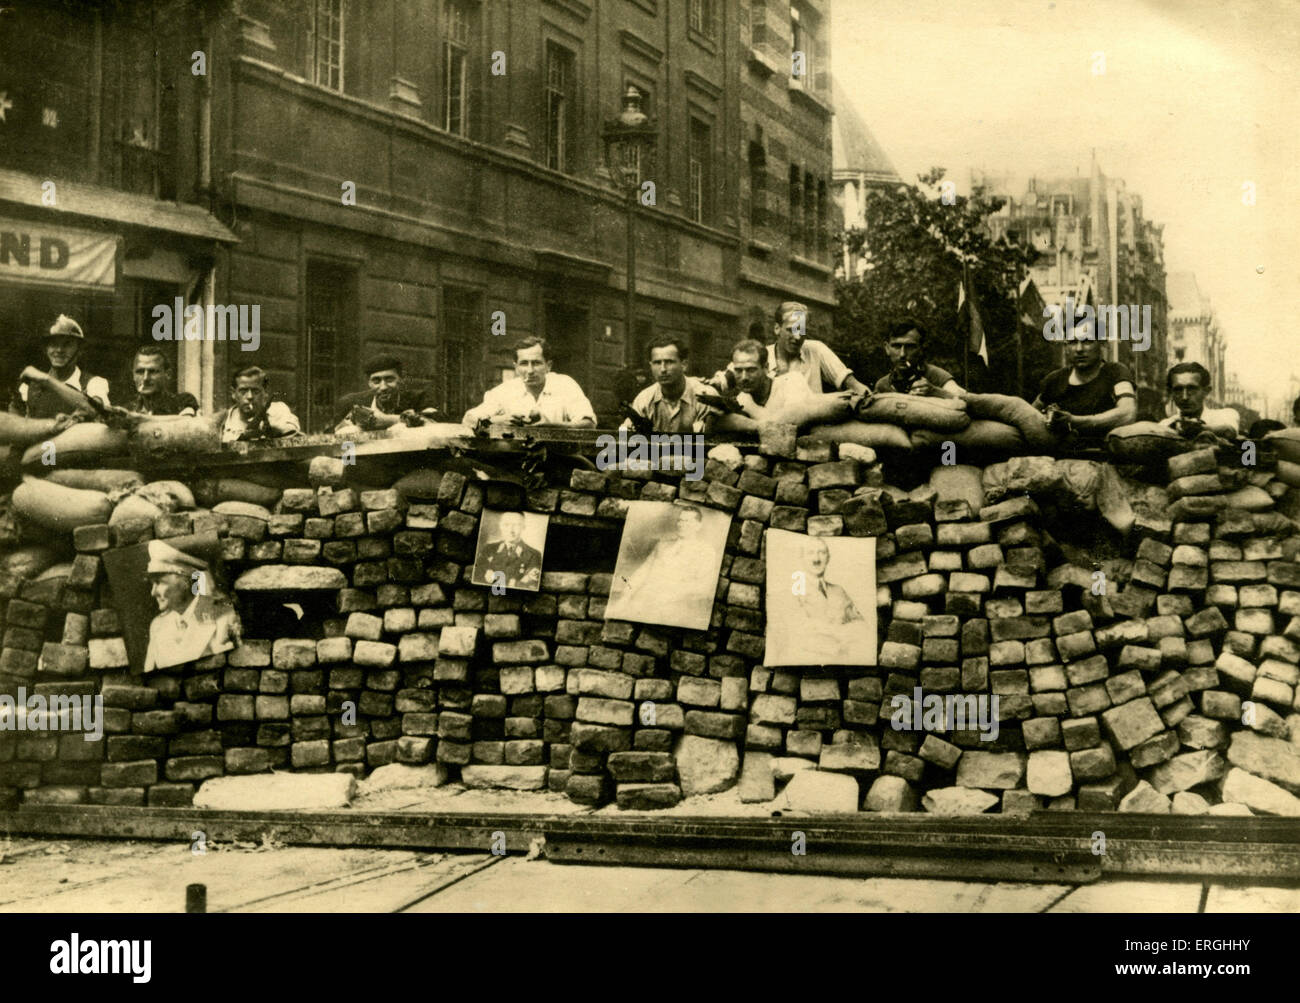 WW2: Barricades in Rue Saint Jacques, Paris, France. Possibly erected by Free French Forces (Forces françaises libres) during Stock Photo